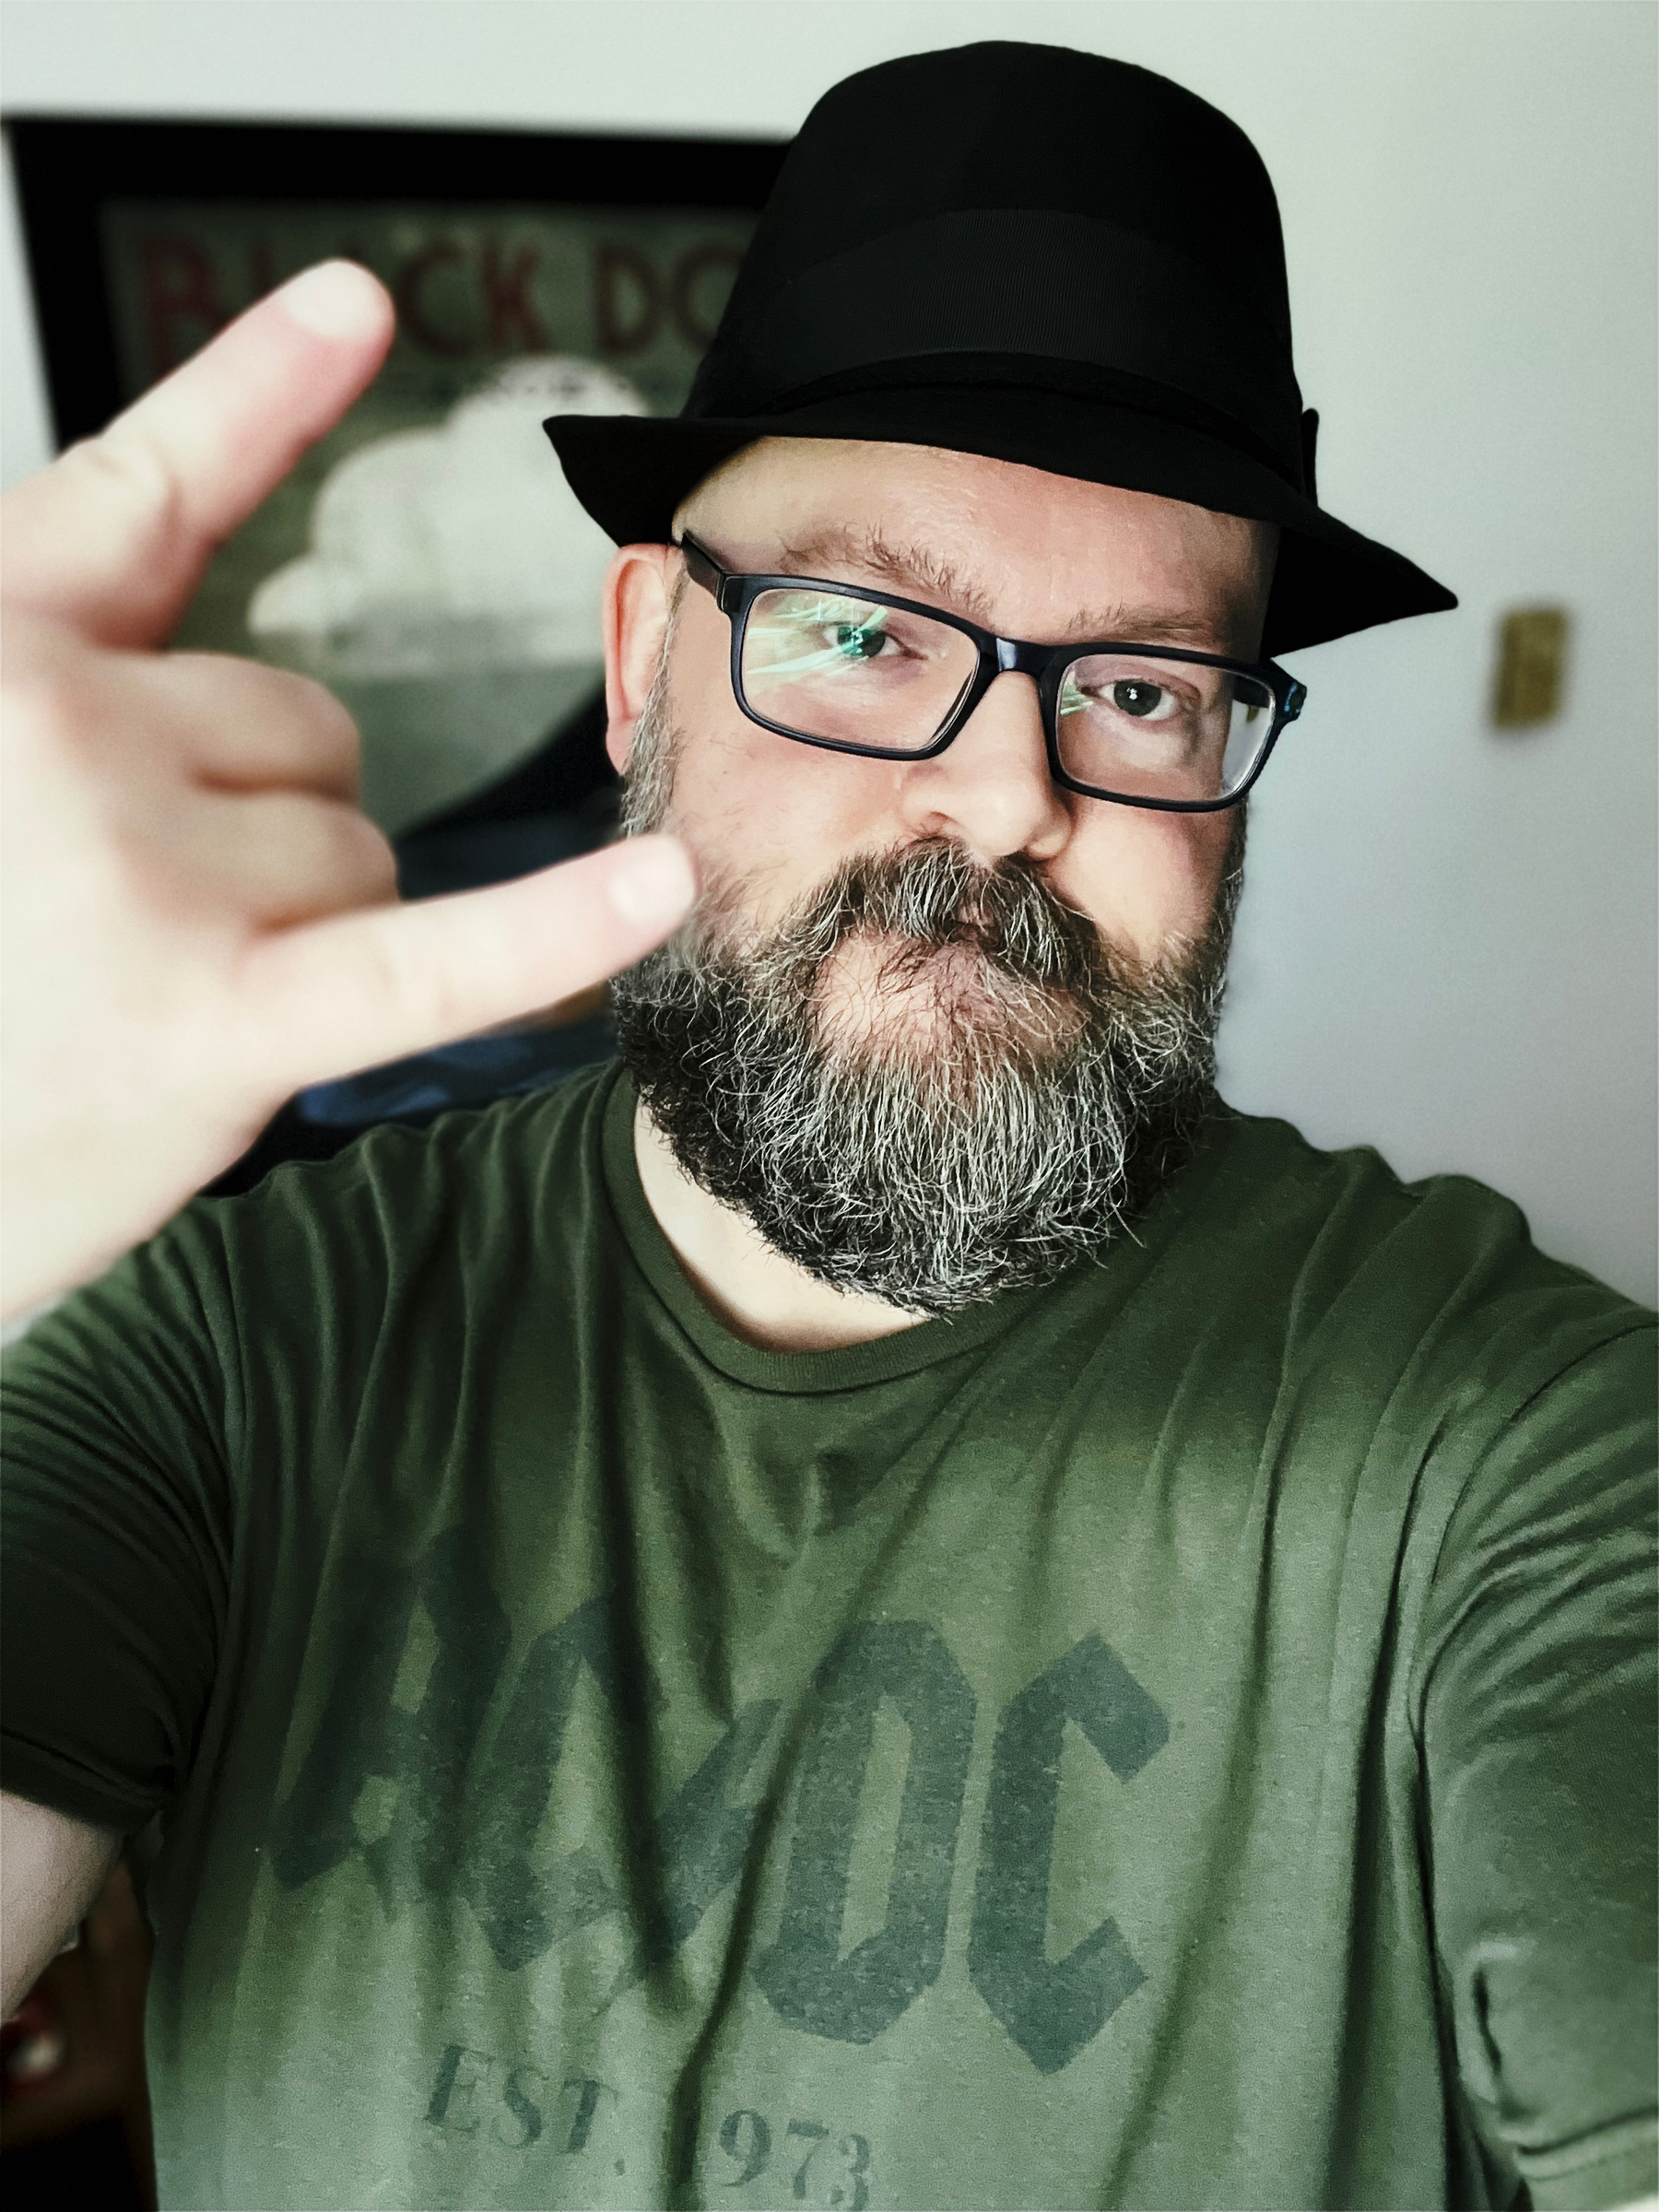 Portrait of me in a forest green tee with the AC/DC band logo on it. I’m wearing my black Trilby (of course), and giving the “rock on” hand gesture. With luck, I look like a cool geek instead of just a geek.